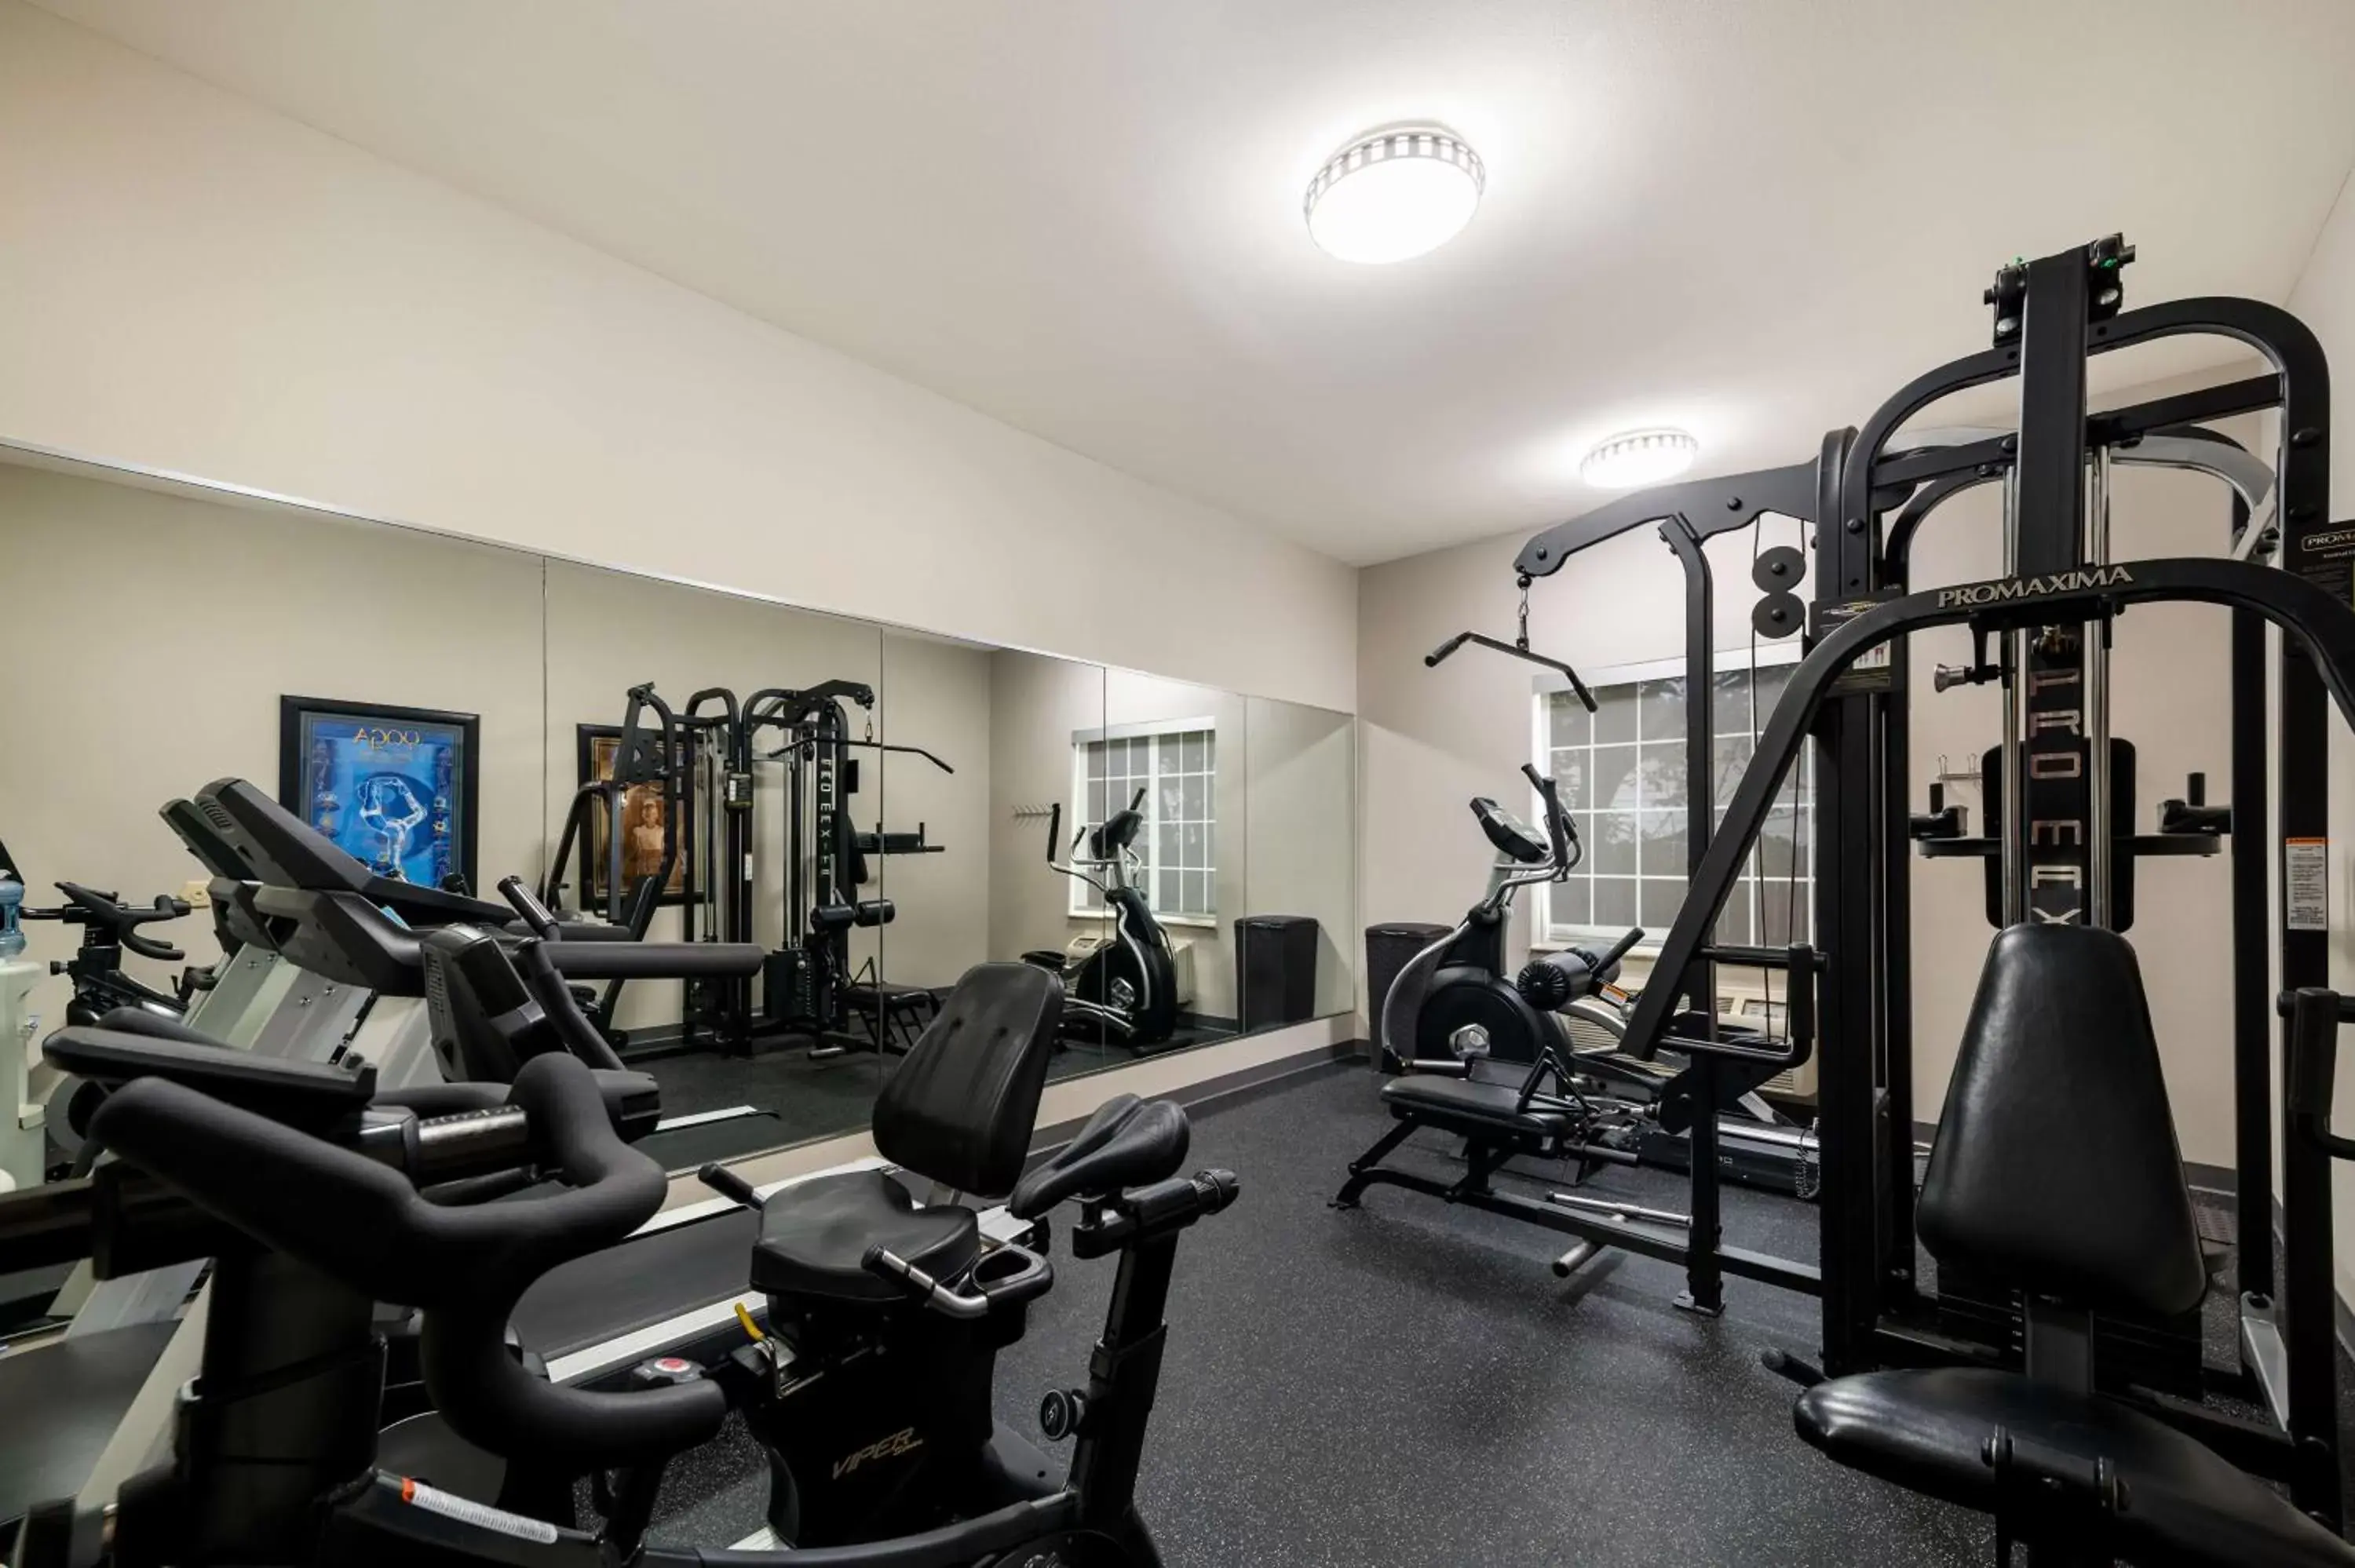 Fitness centre/facilities, Fitness Center/Facilities in Best Western Plus Lake Dallas Inn & Suites